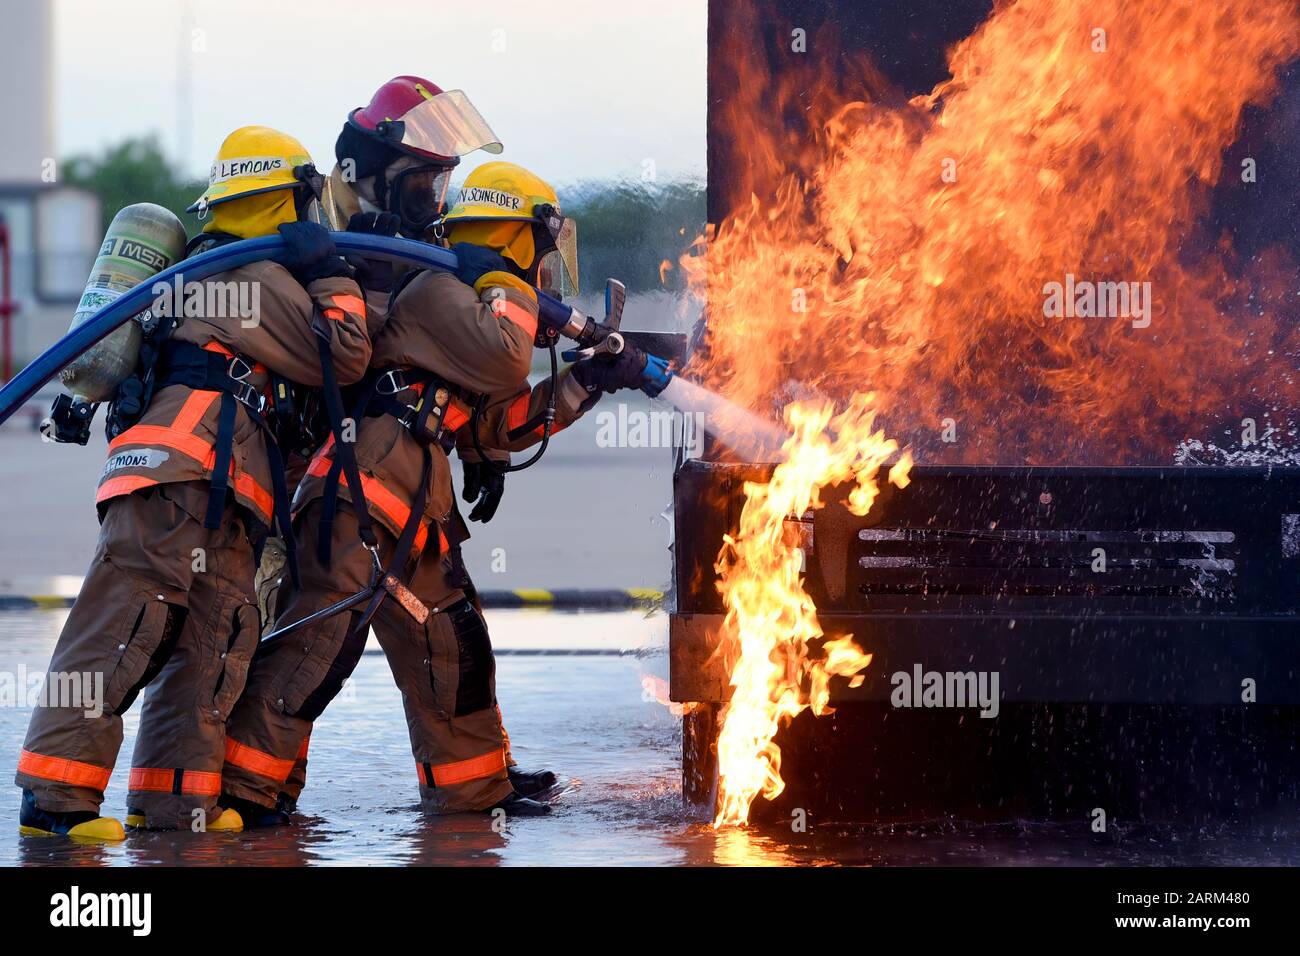 U.S. Air Force Airman Kristina Schneinder, 312th Training Squadron student, leads Airman Emalie Lemons, 312th TRS student, in a textbook style approach to a mock vehicle fire outside the Louis F. Garland Department of Defense Fire Academy on Goodfellow Air Force Base, Texas, July 11, 2019.  Schneinder and Lemons were trained in the classroom how to approach a live fire and what angle to spray the water hose for hood and undercarriage fires before their hands on experience. (U.S. Air Force Photo by Airman 1st Class Abbey Rieves/Released) Stock Photo